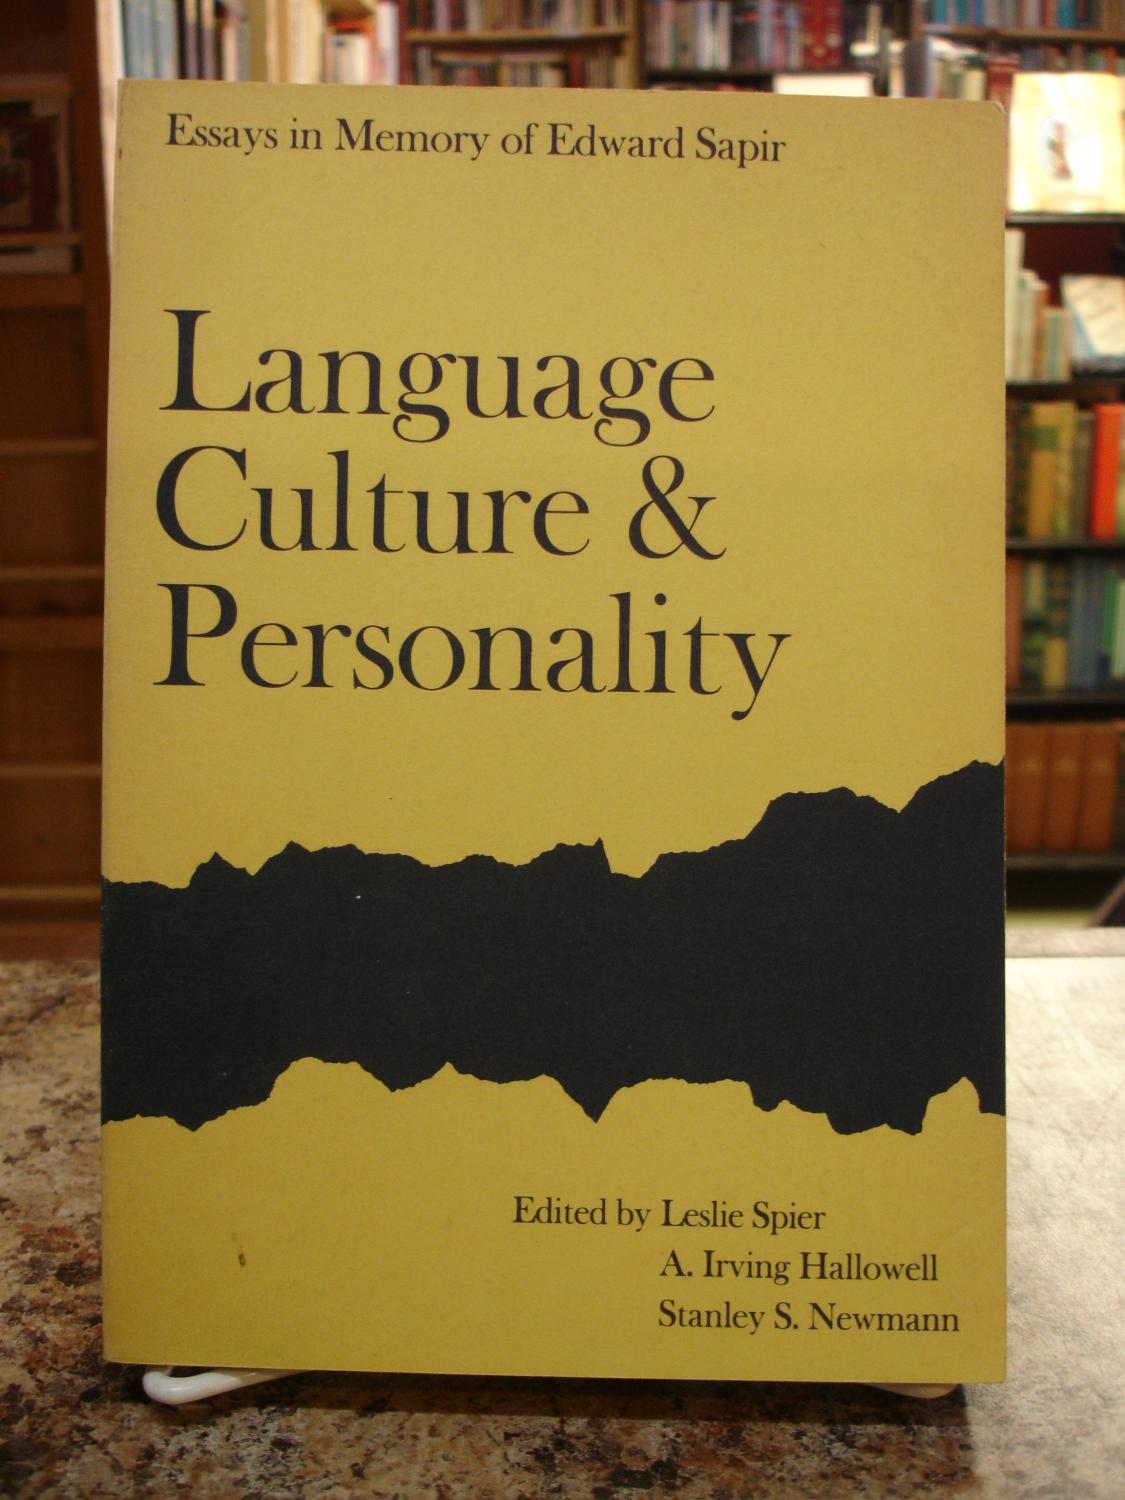 language culture and personality essays in memory of edward sapir